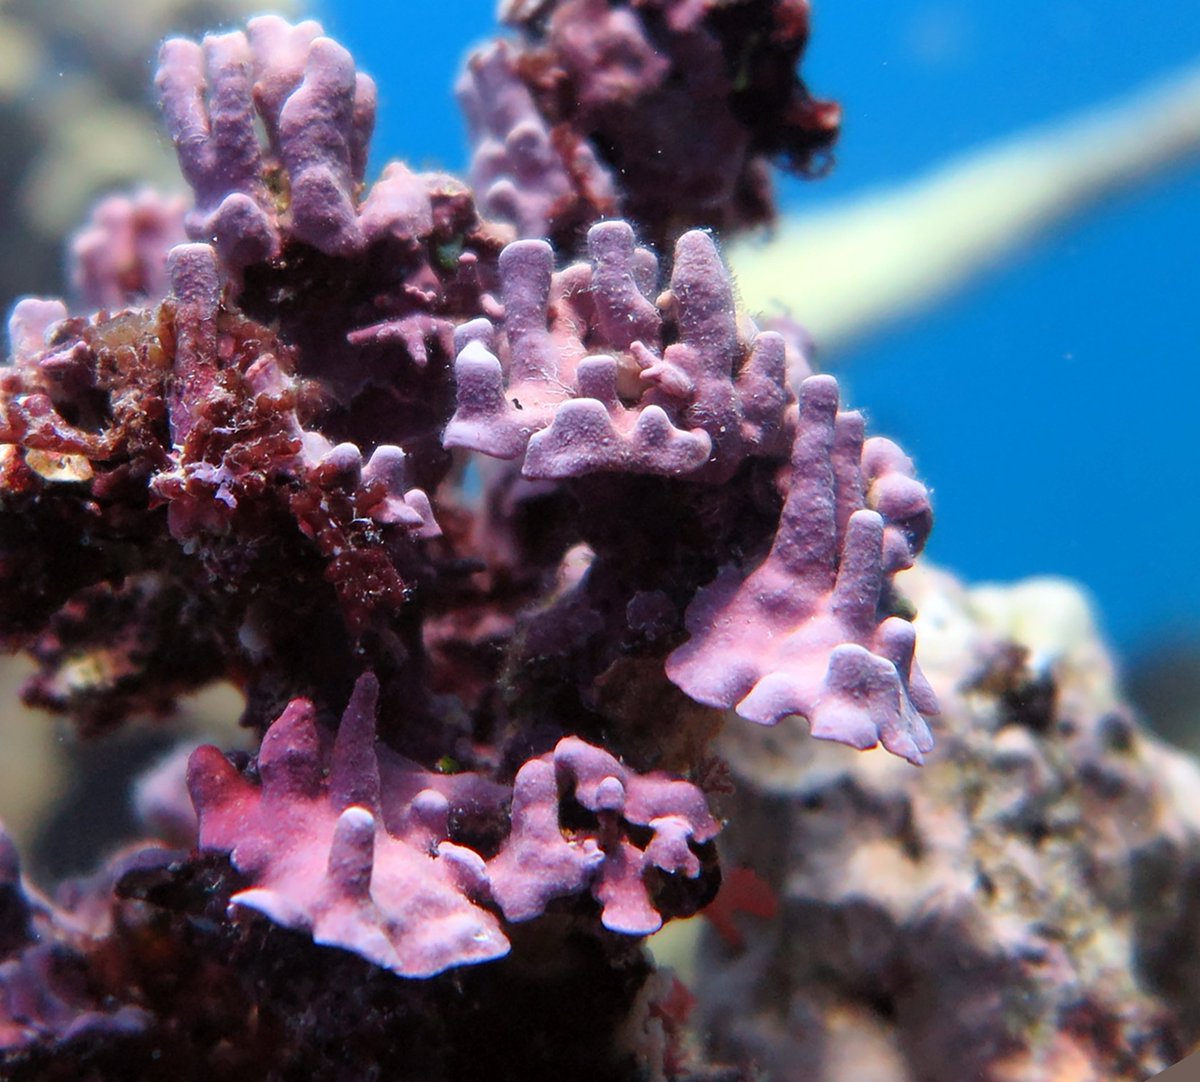 Delighted to share our new study uncovering the diversity of crustose coralline algae from the Great Barrier Reef #GBR, Coral Sea and Lord Howe Island. onlinelibrary.wiley.com/doi/full/10.11…